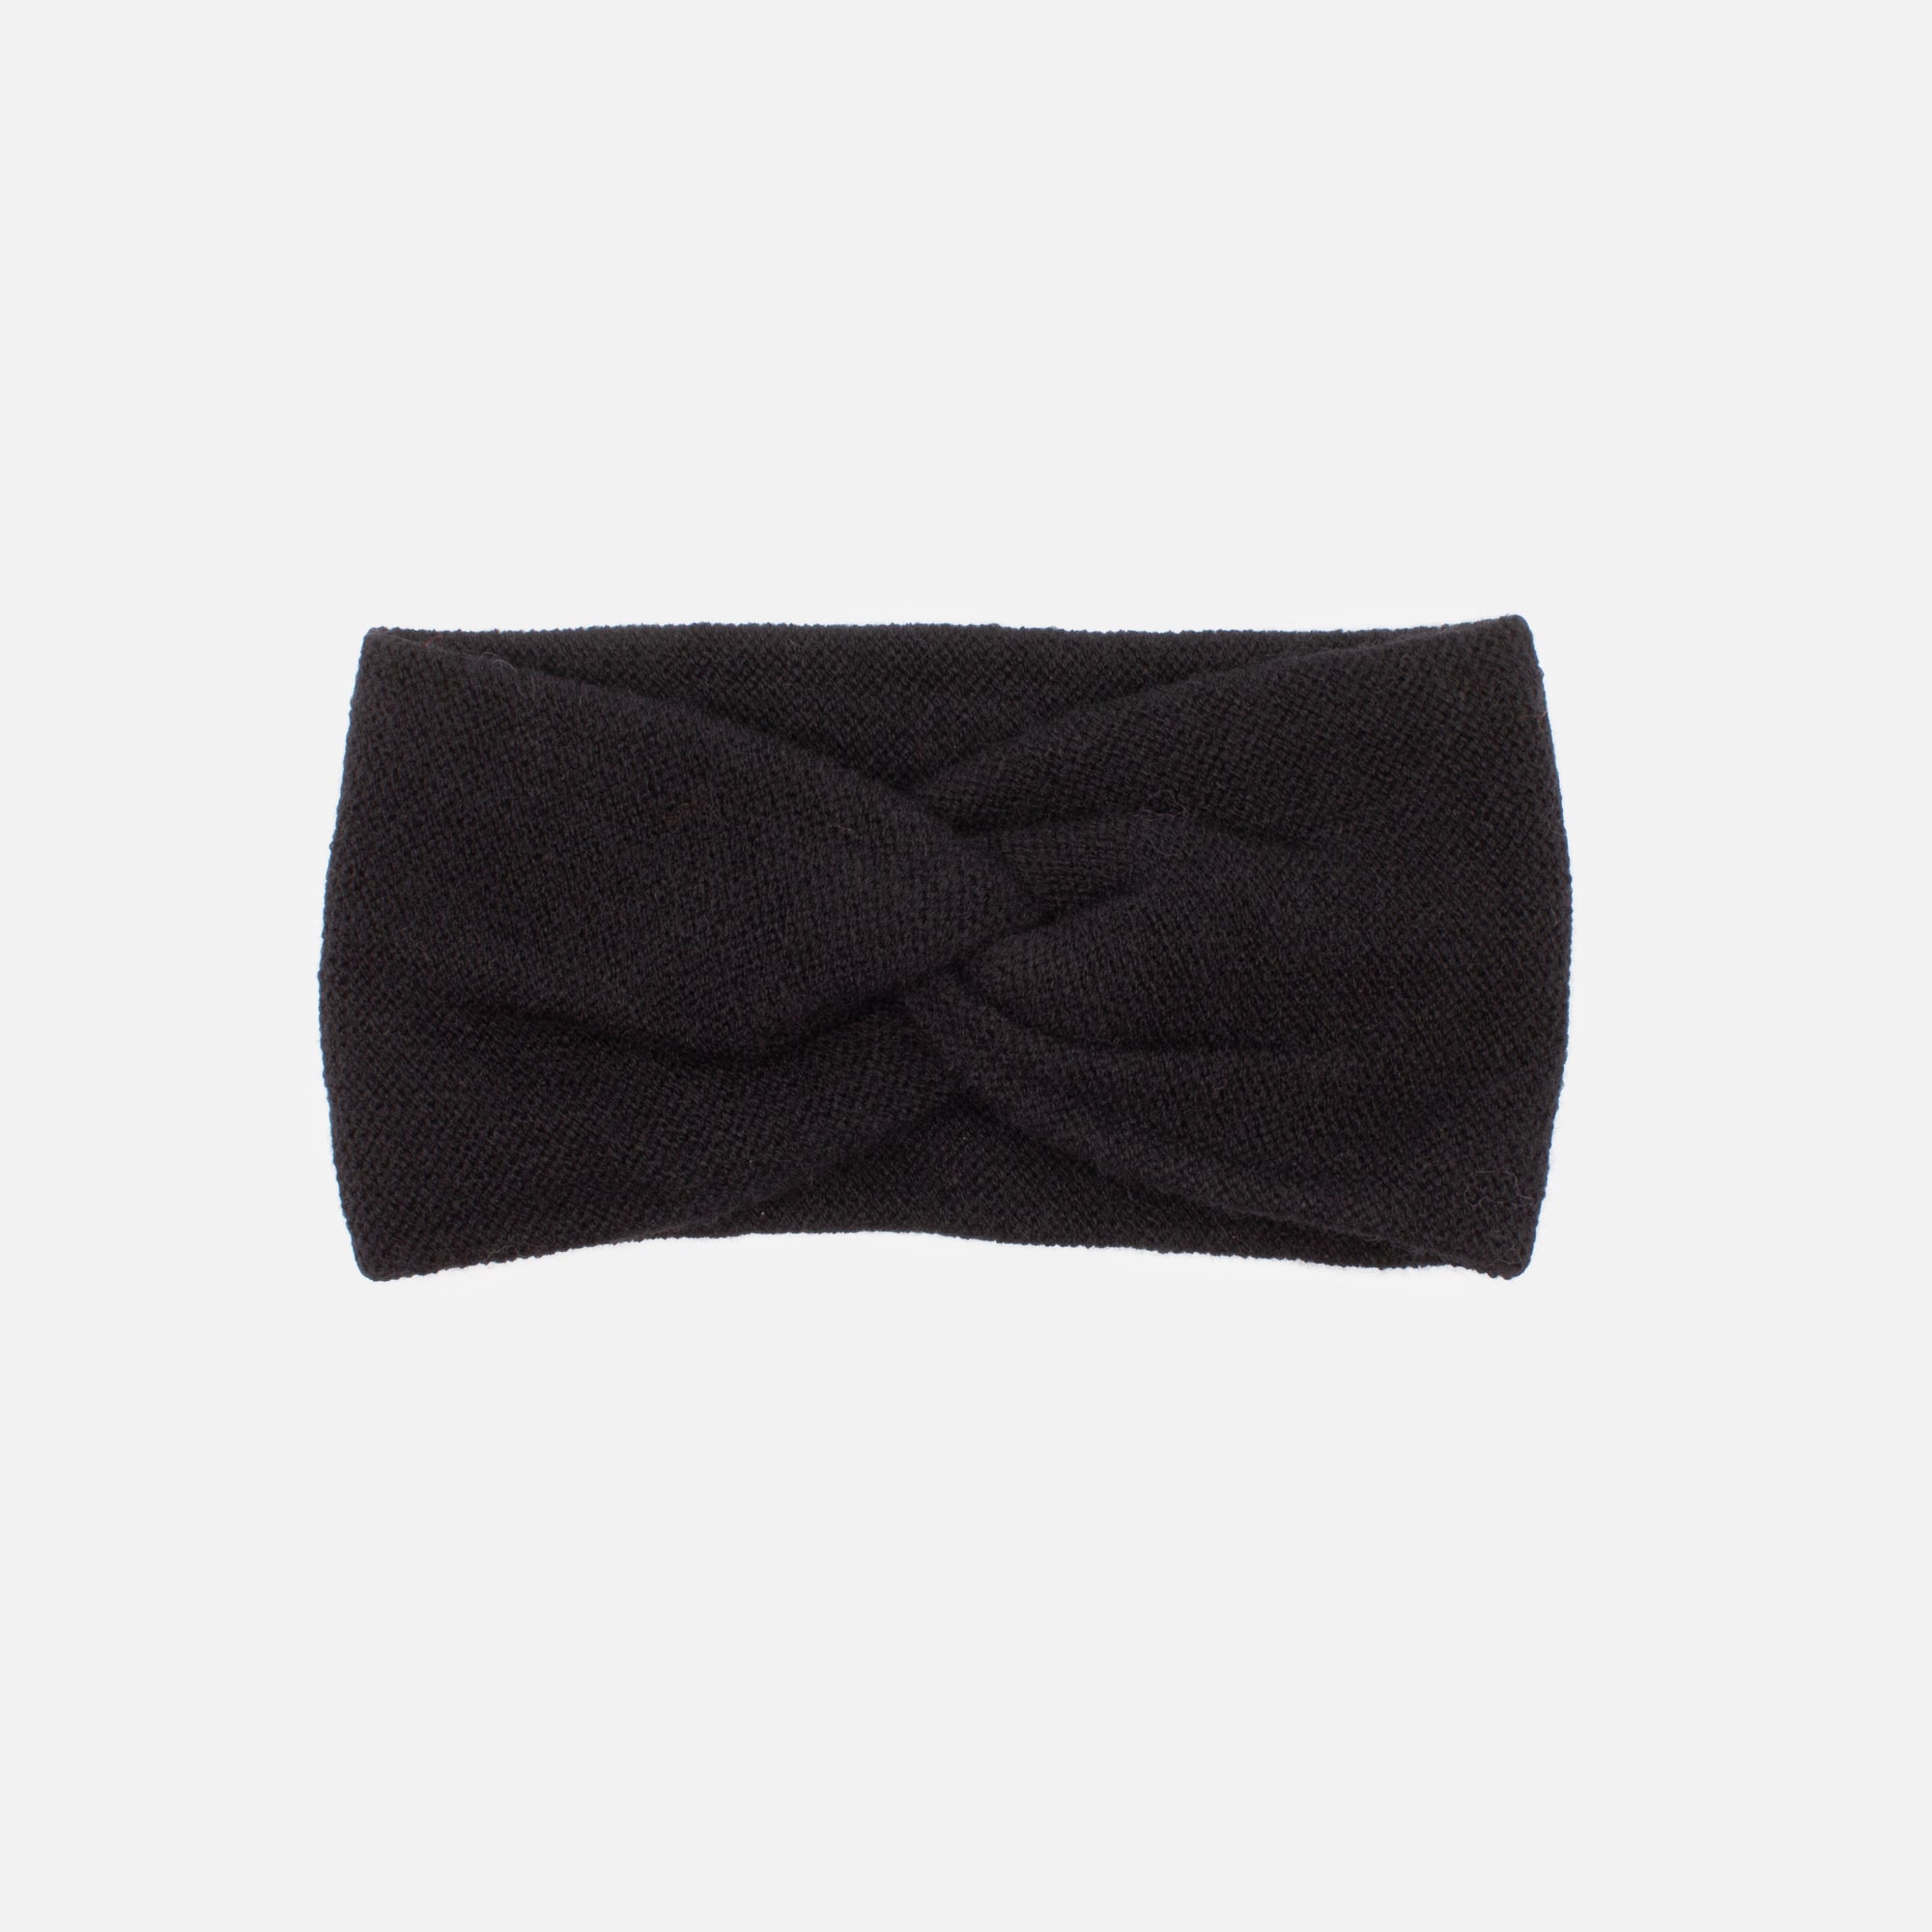 Black small knit headband with buckle